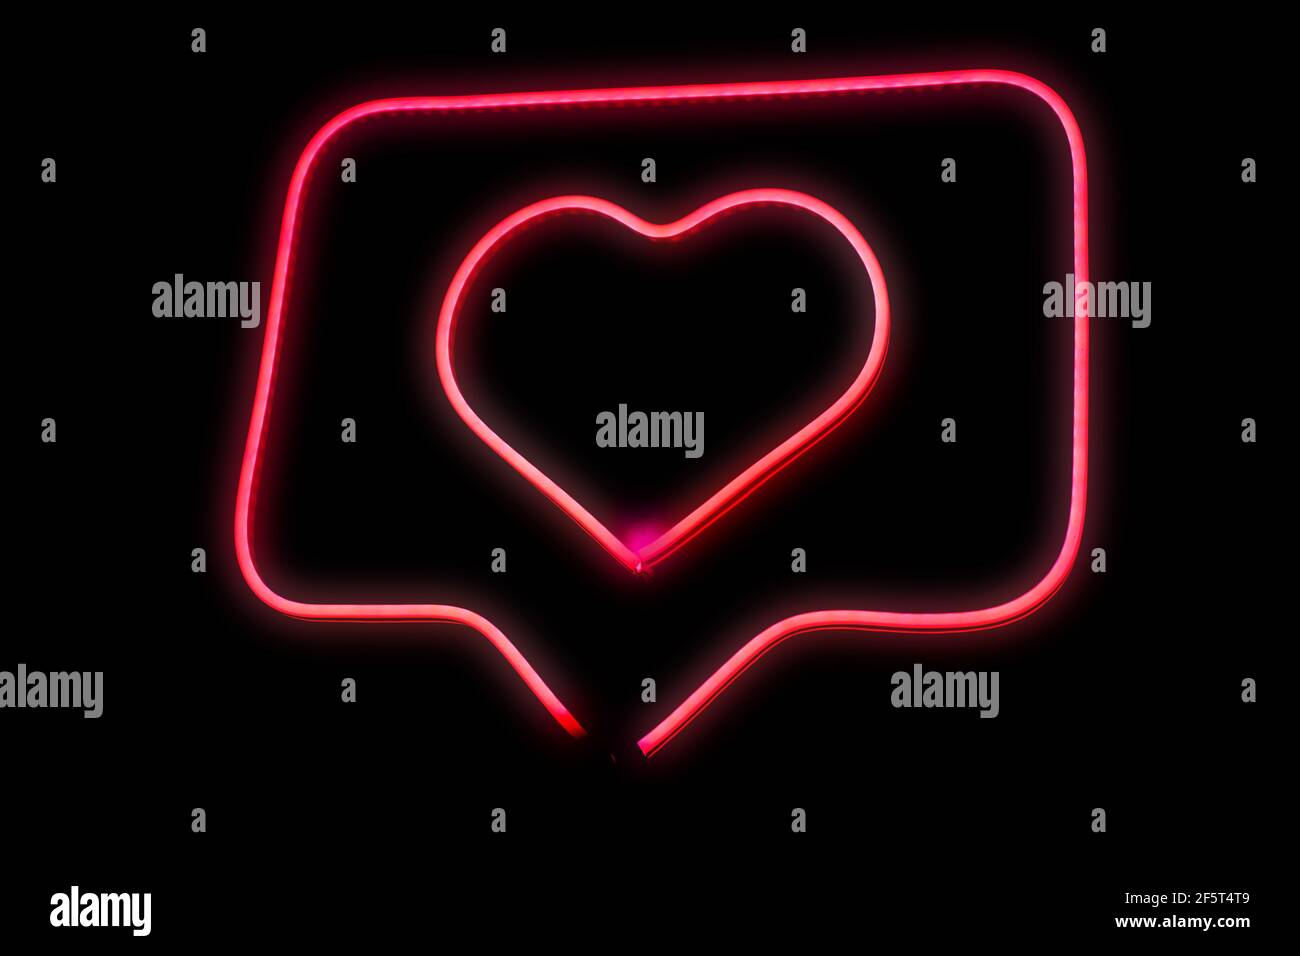 Neon light pink heart love in chat bubble box isolated grow in the dark background. Stock Photo